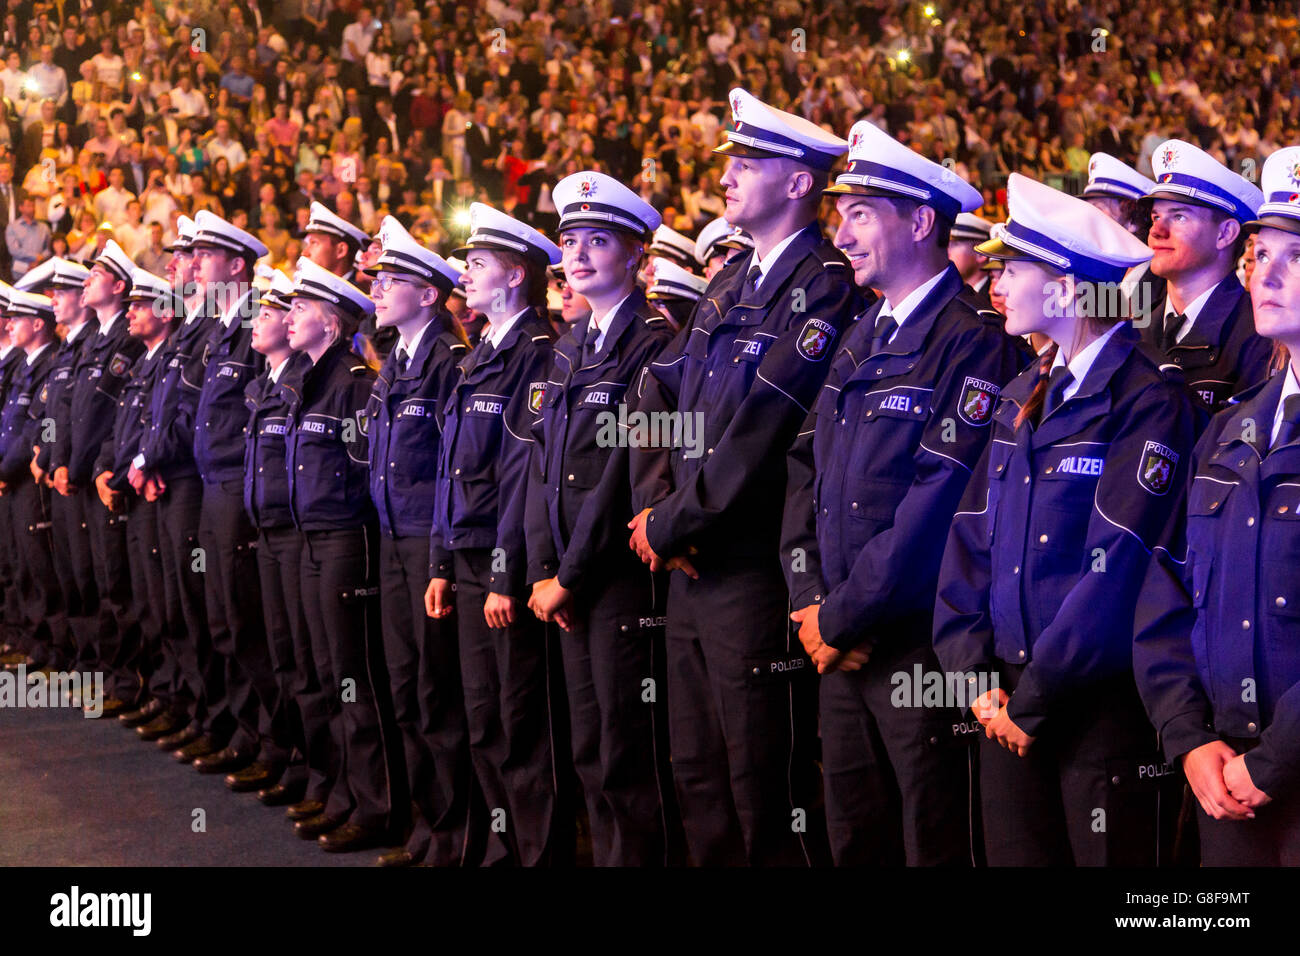 Swearing ceremony of 1891 Commissioner contenders and Commissioner candidates in Cologne's Lanxess Arena, new Police officers Stock Photo